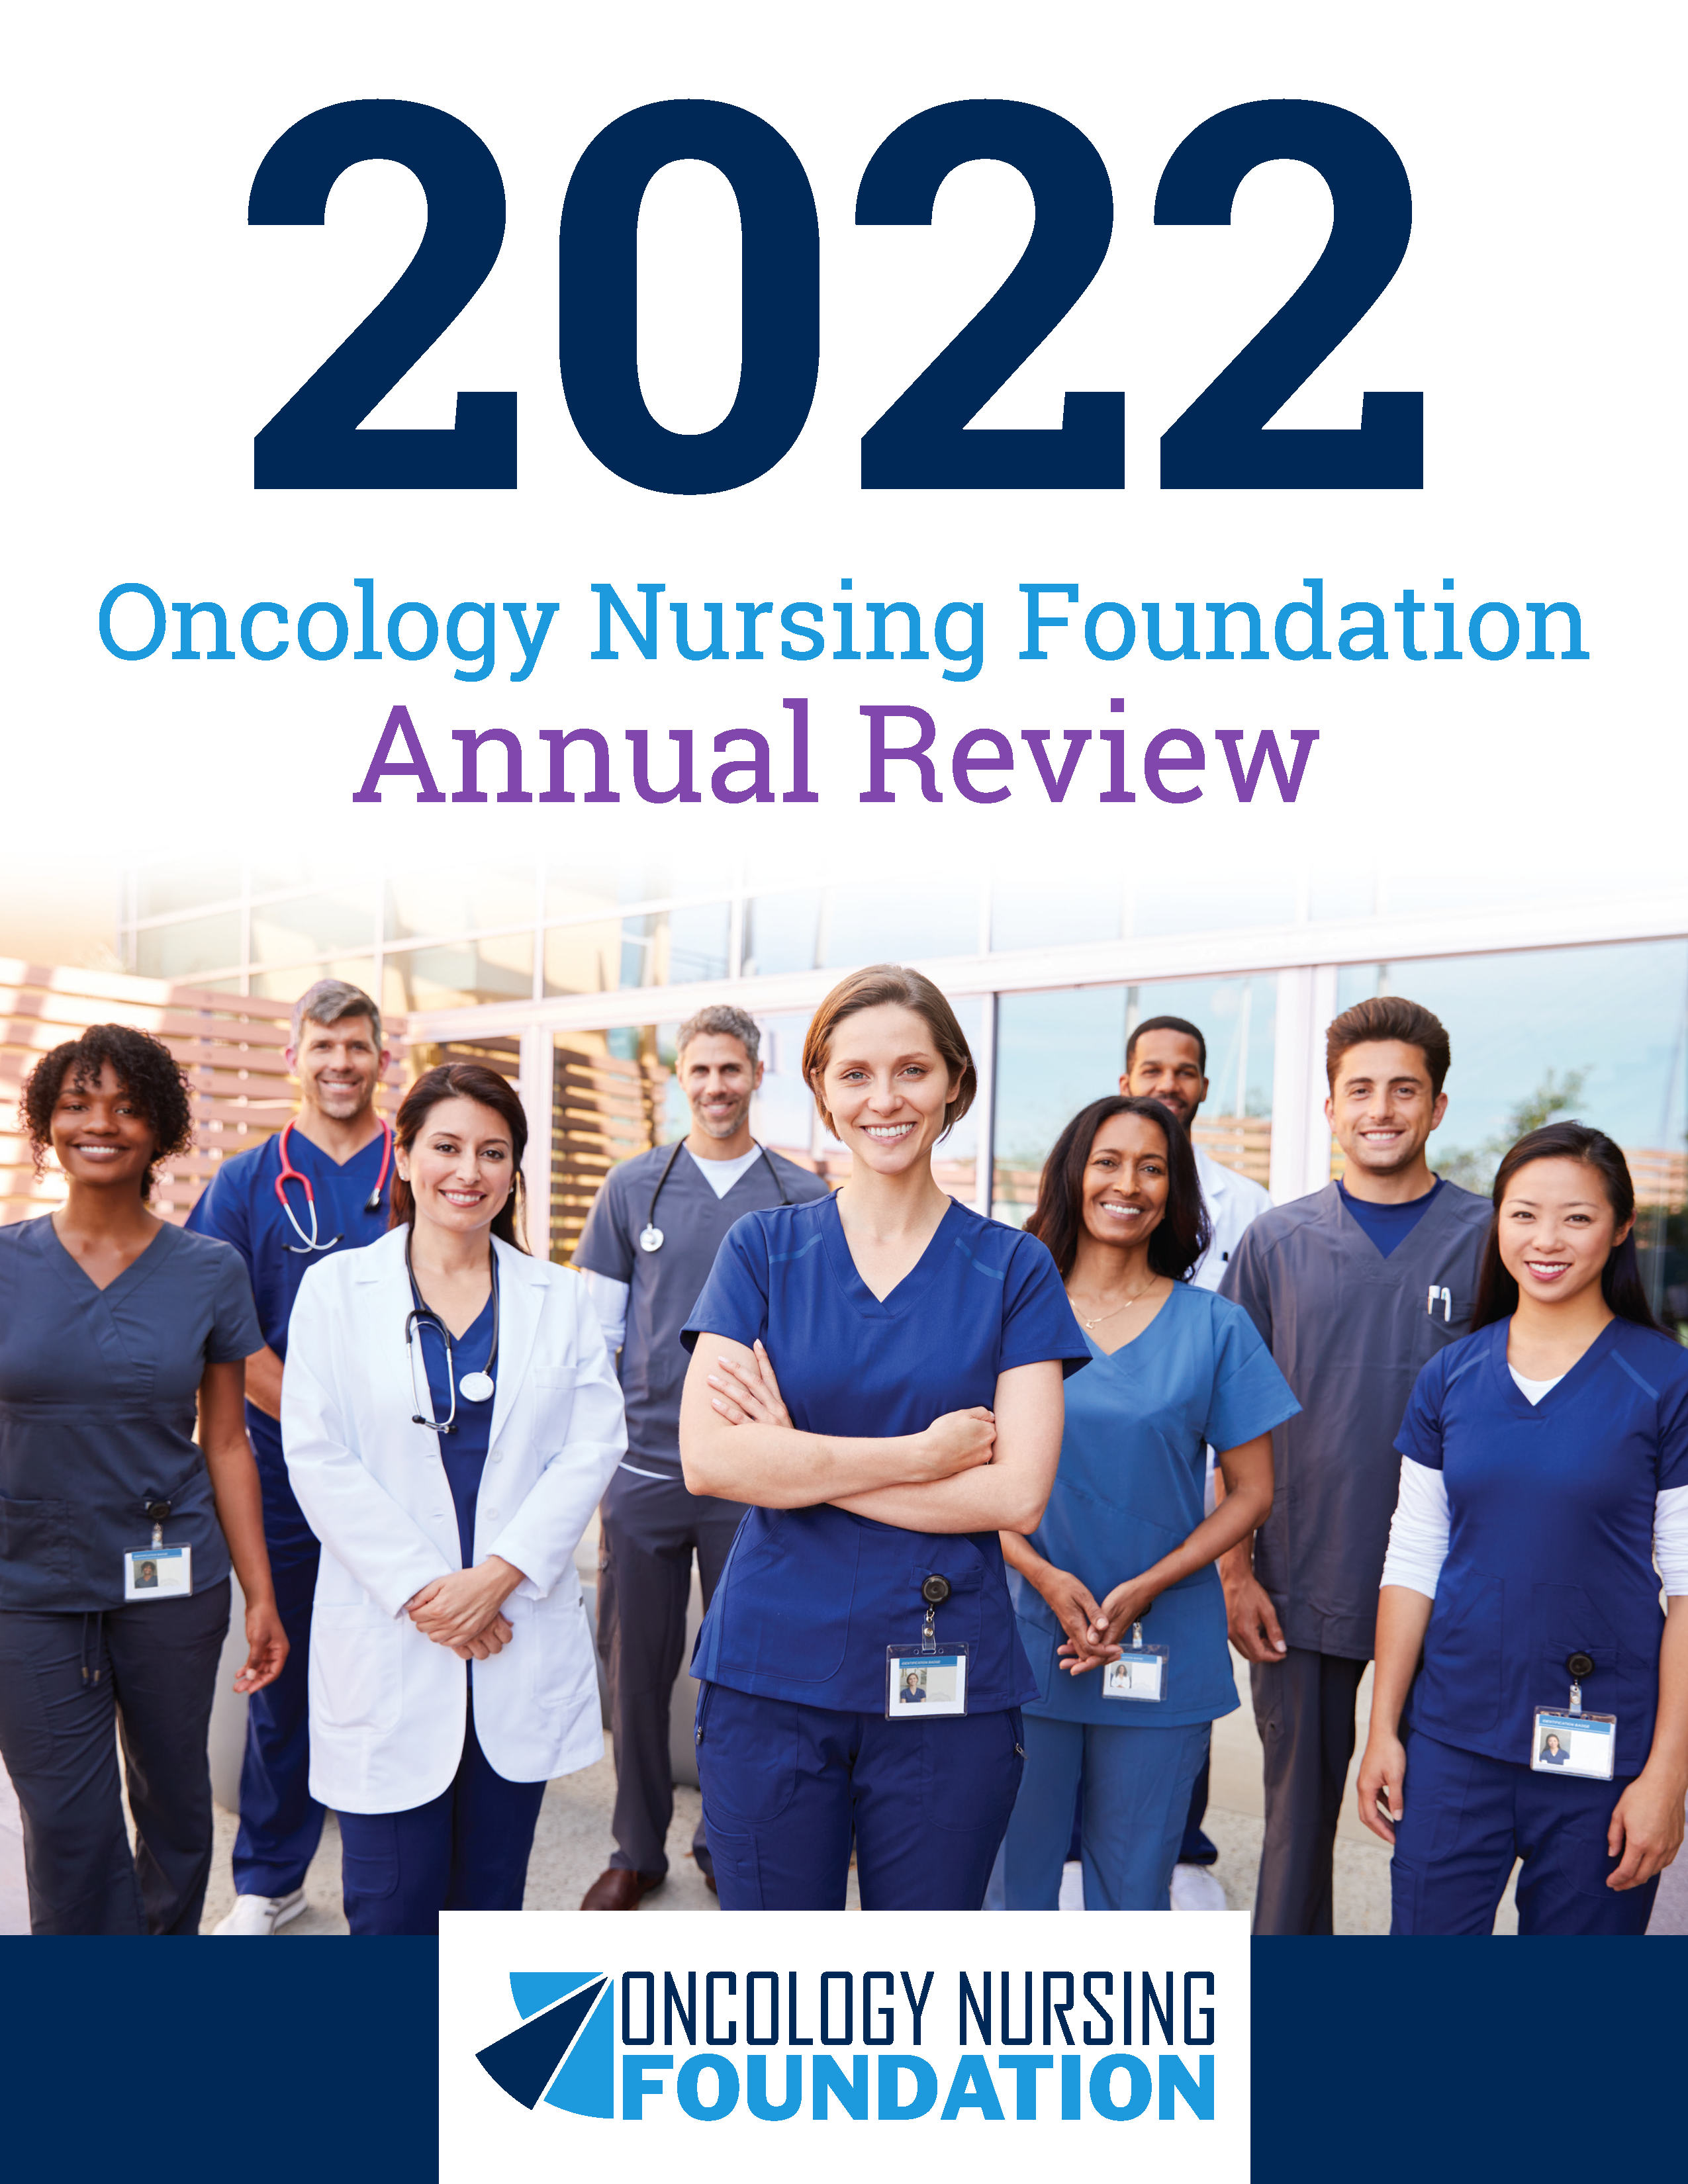 (Image) 2022 Foundation Annual Review Cover